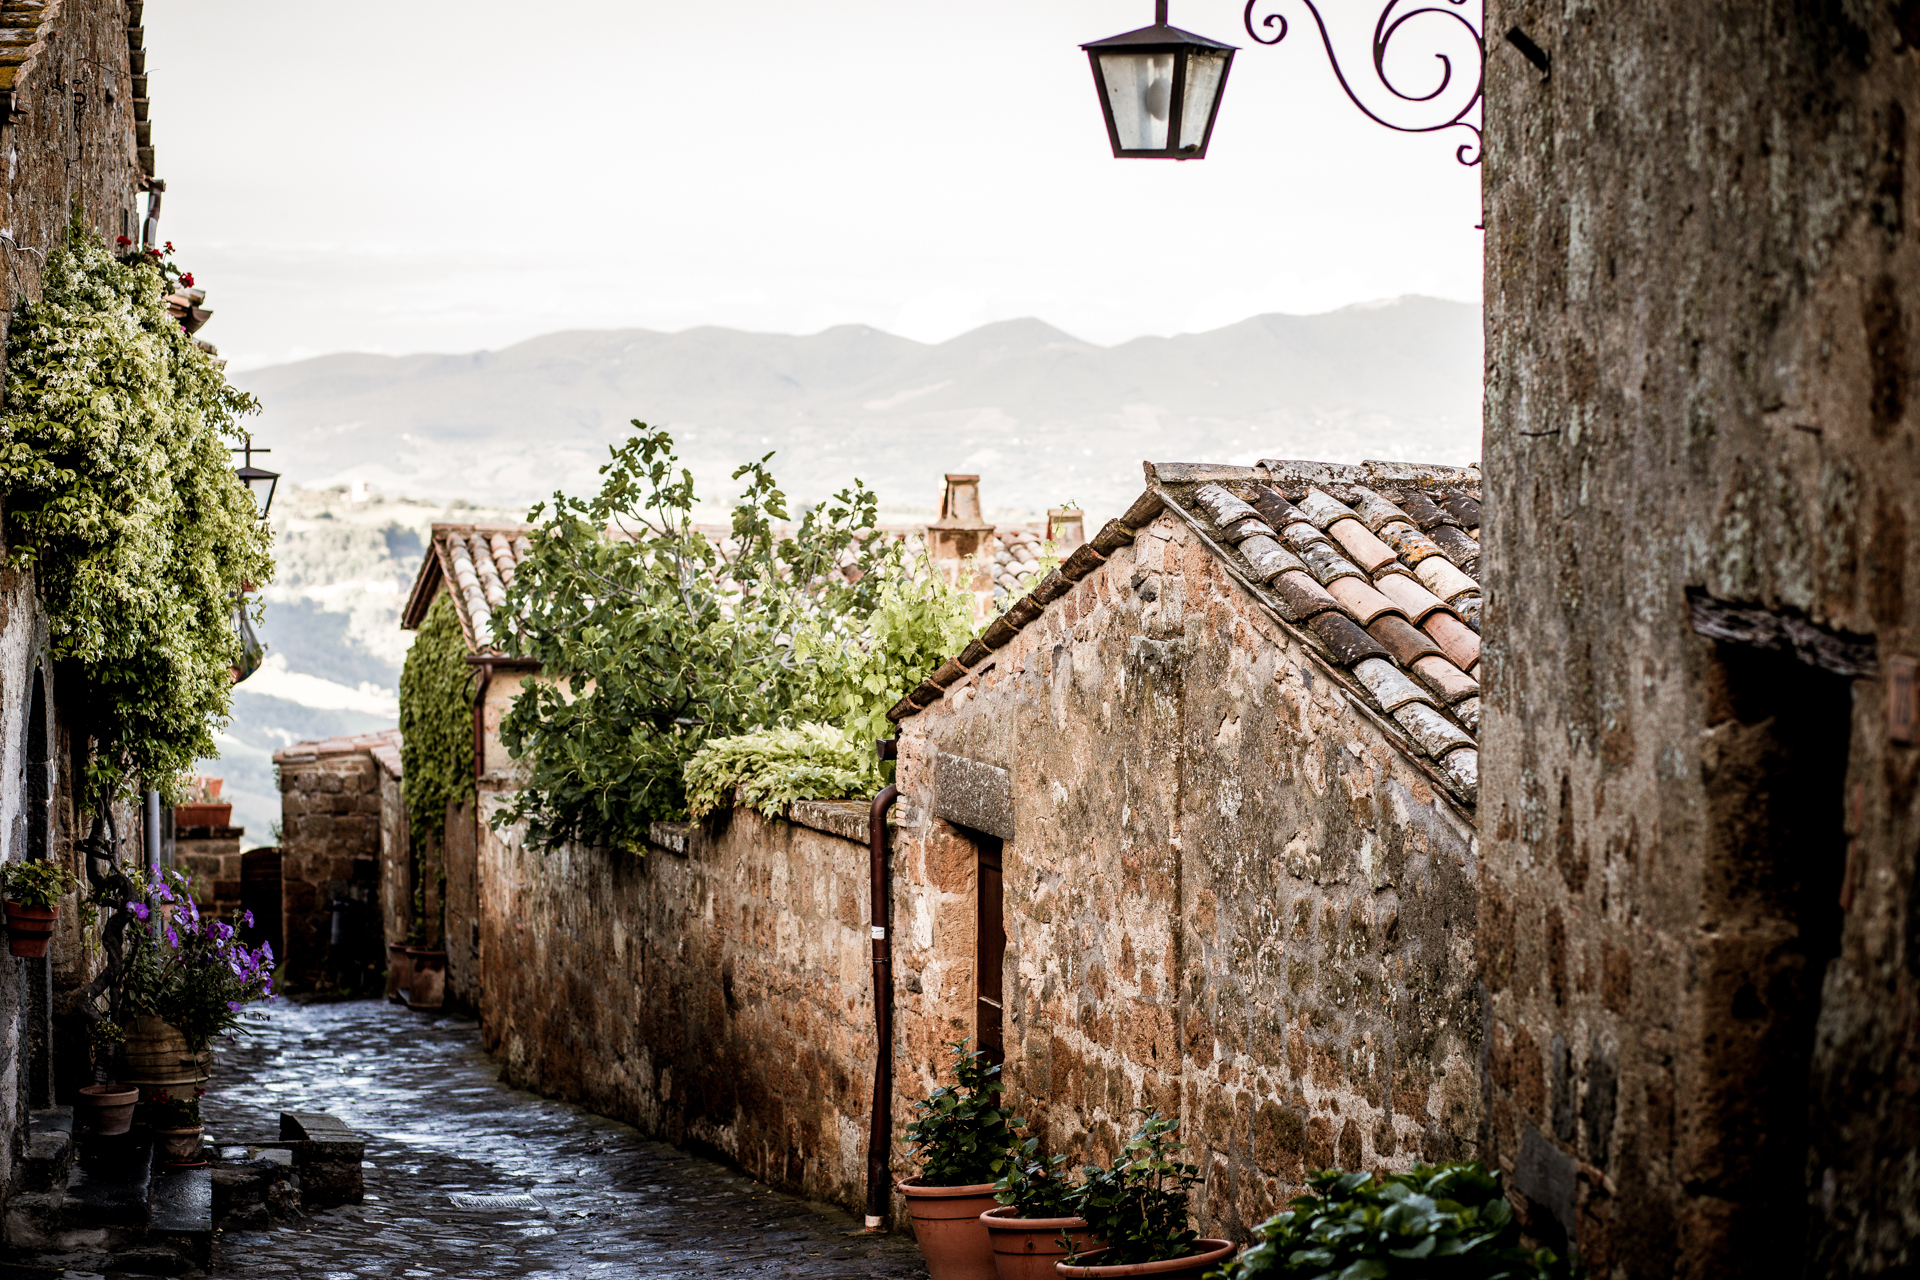 10 Gorgeous Views in Tuscany Italy | Tuscany Photos by popular New England travel blogger, Shannon Shipman: image of a stone building with a clay tile roof in Tuscany, Italy. 